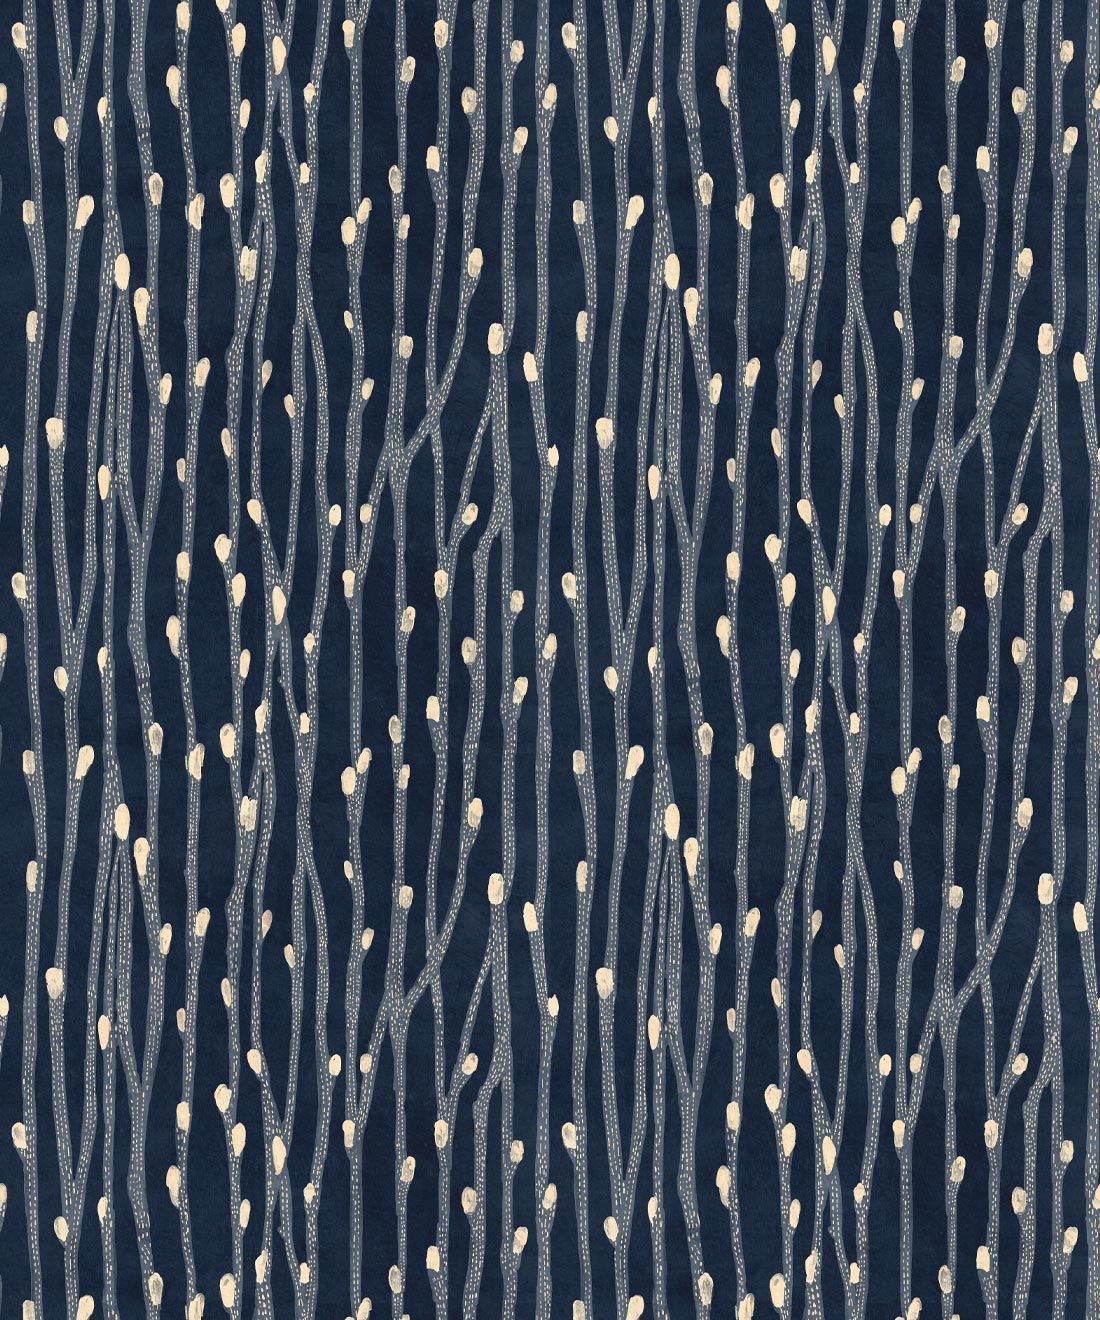 Pussy Willow Wallpaper • Floral Wallpaper • Indigo • Swatch